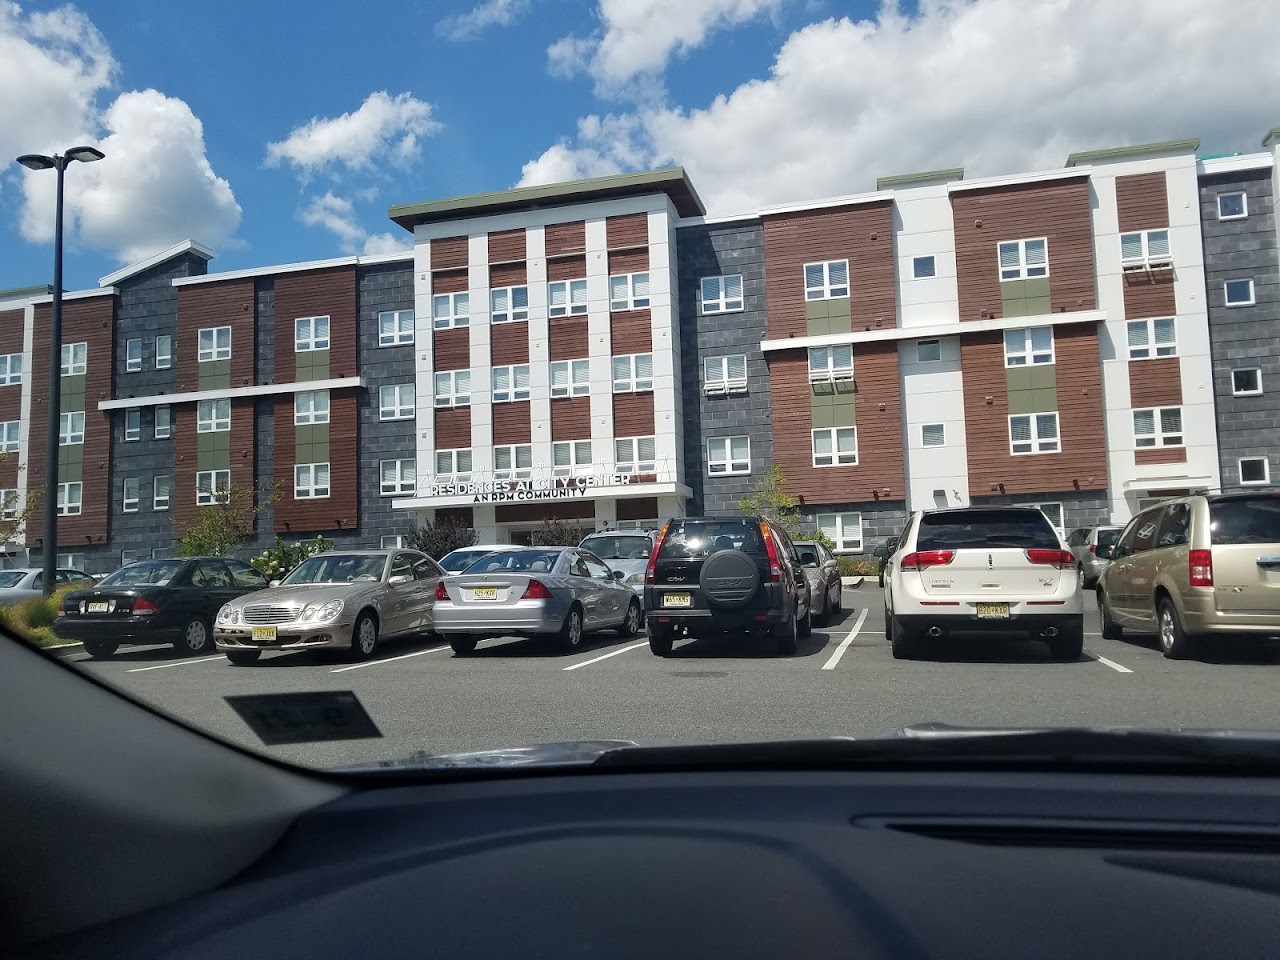 Photo of PLEASANTVILLE MIXED USE. Affordable housing located at 1 SOUTH MAIN STREET PLEASANTVILLE, NJ 08232